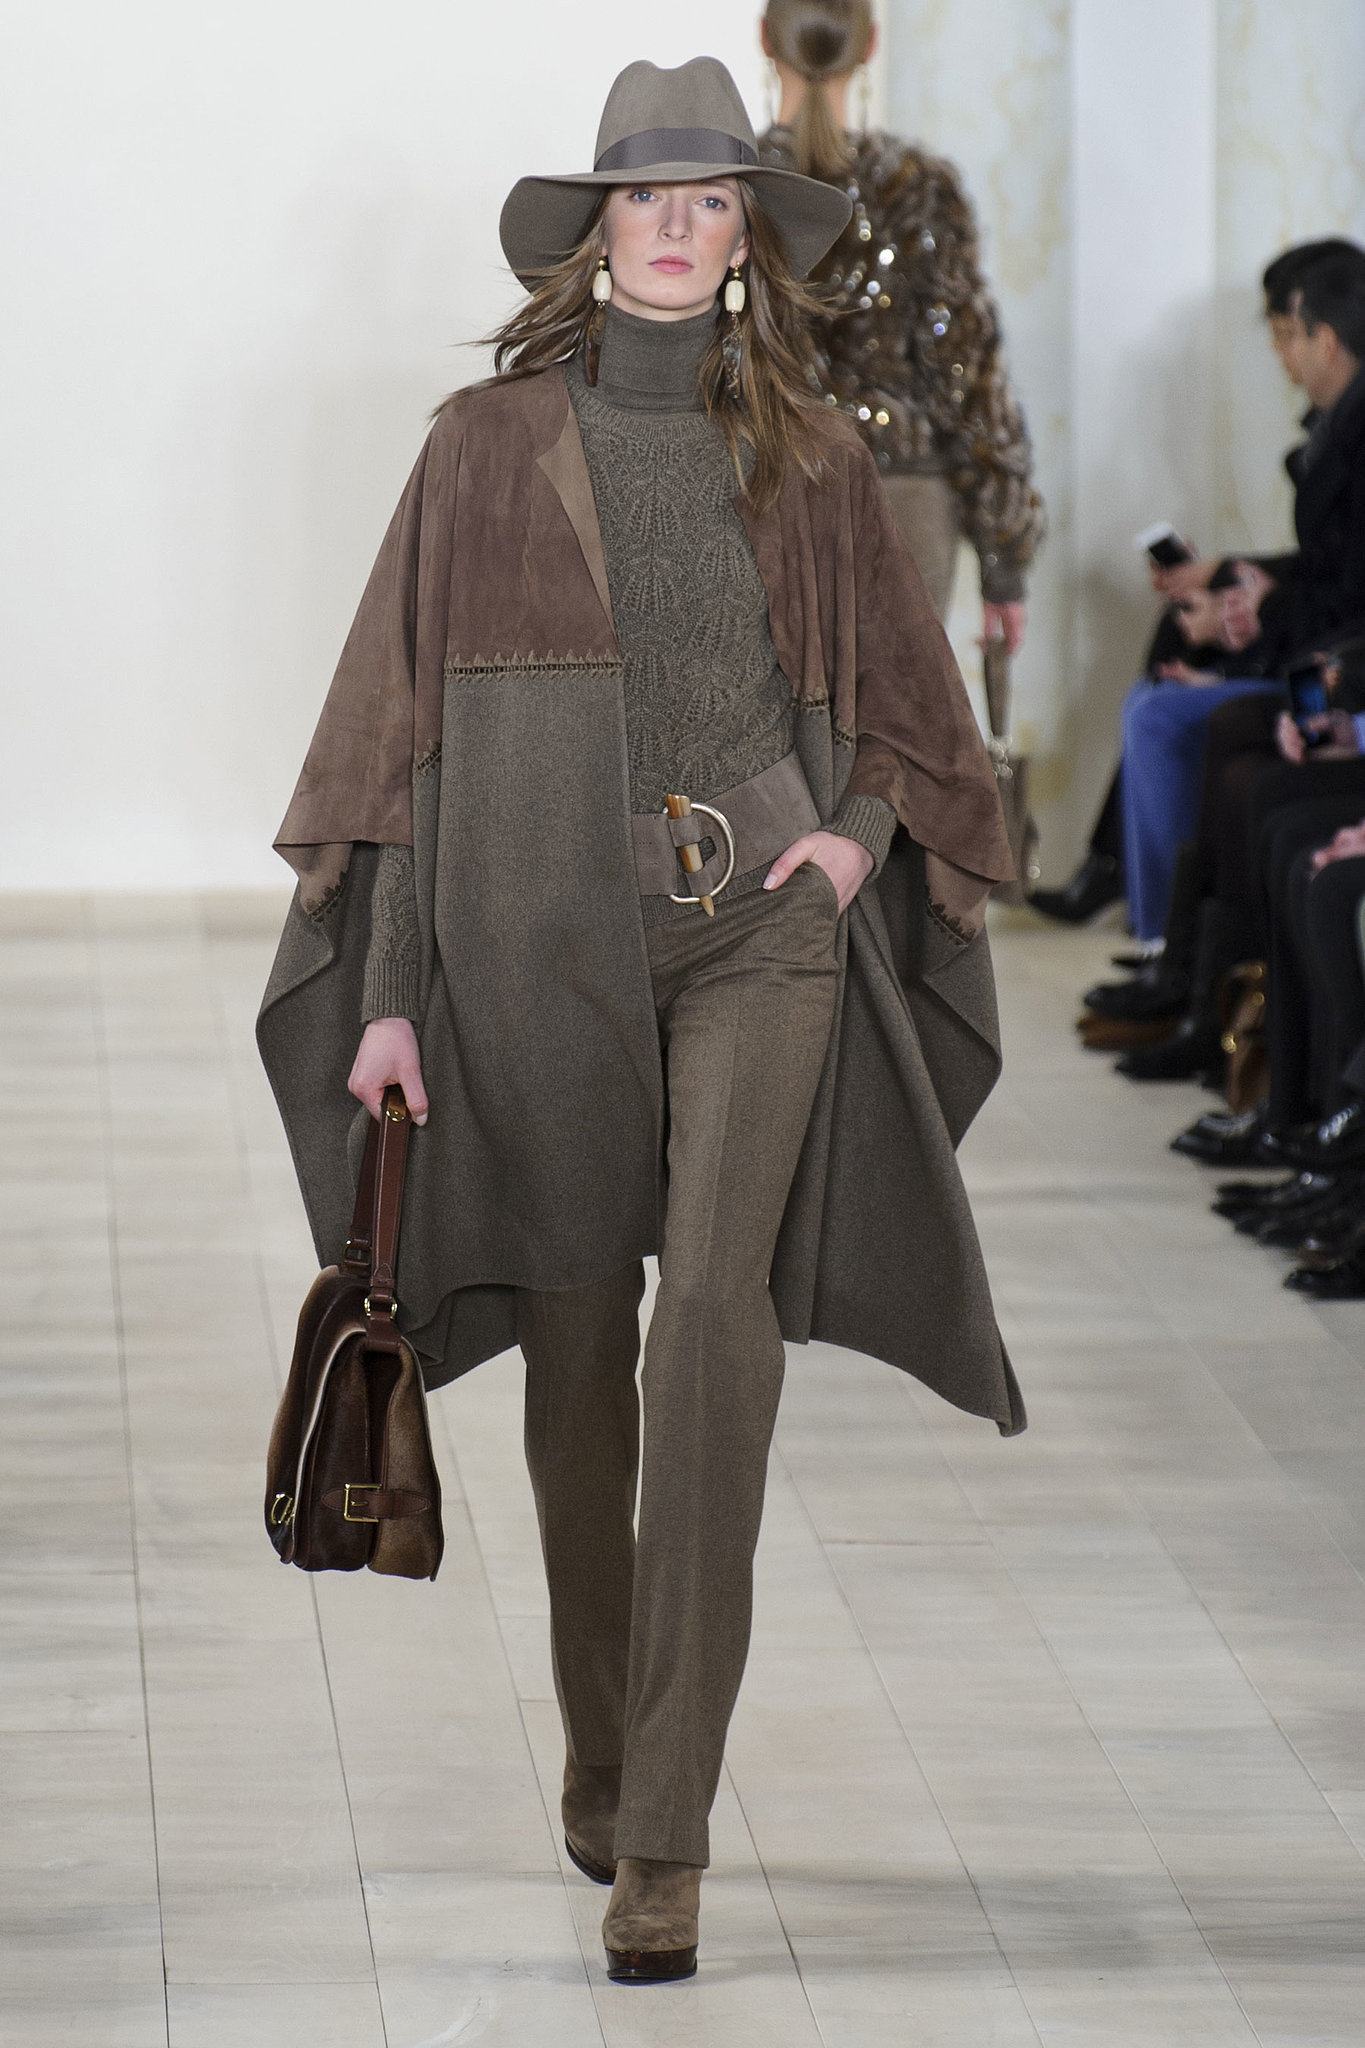 Ralph Lauren Fall 2015 | The Top Fall 2015 Trends From New York Fashion ...